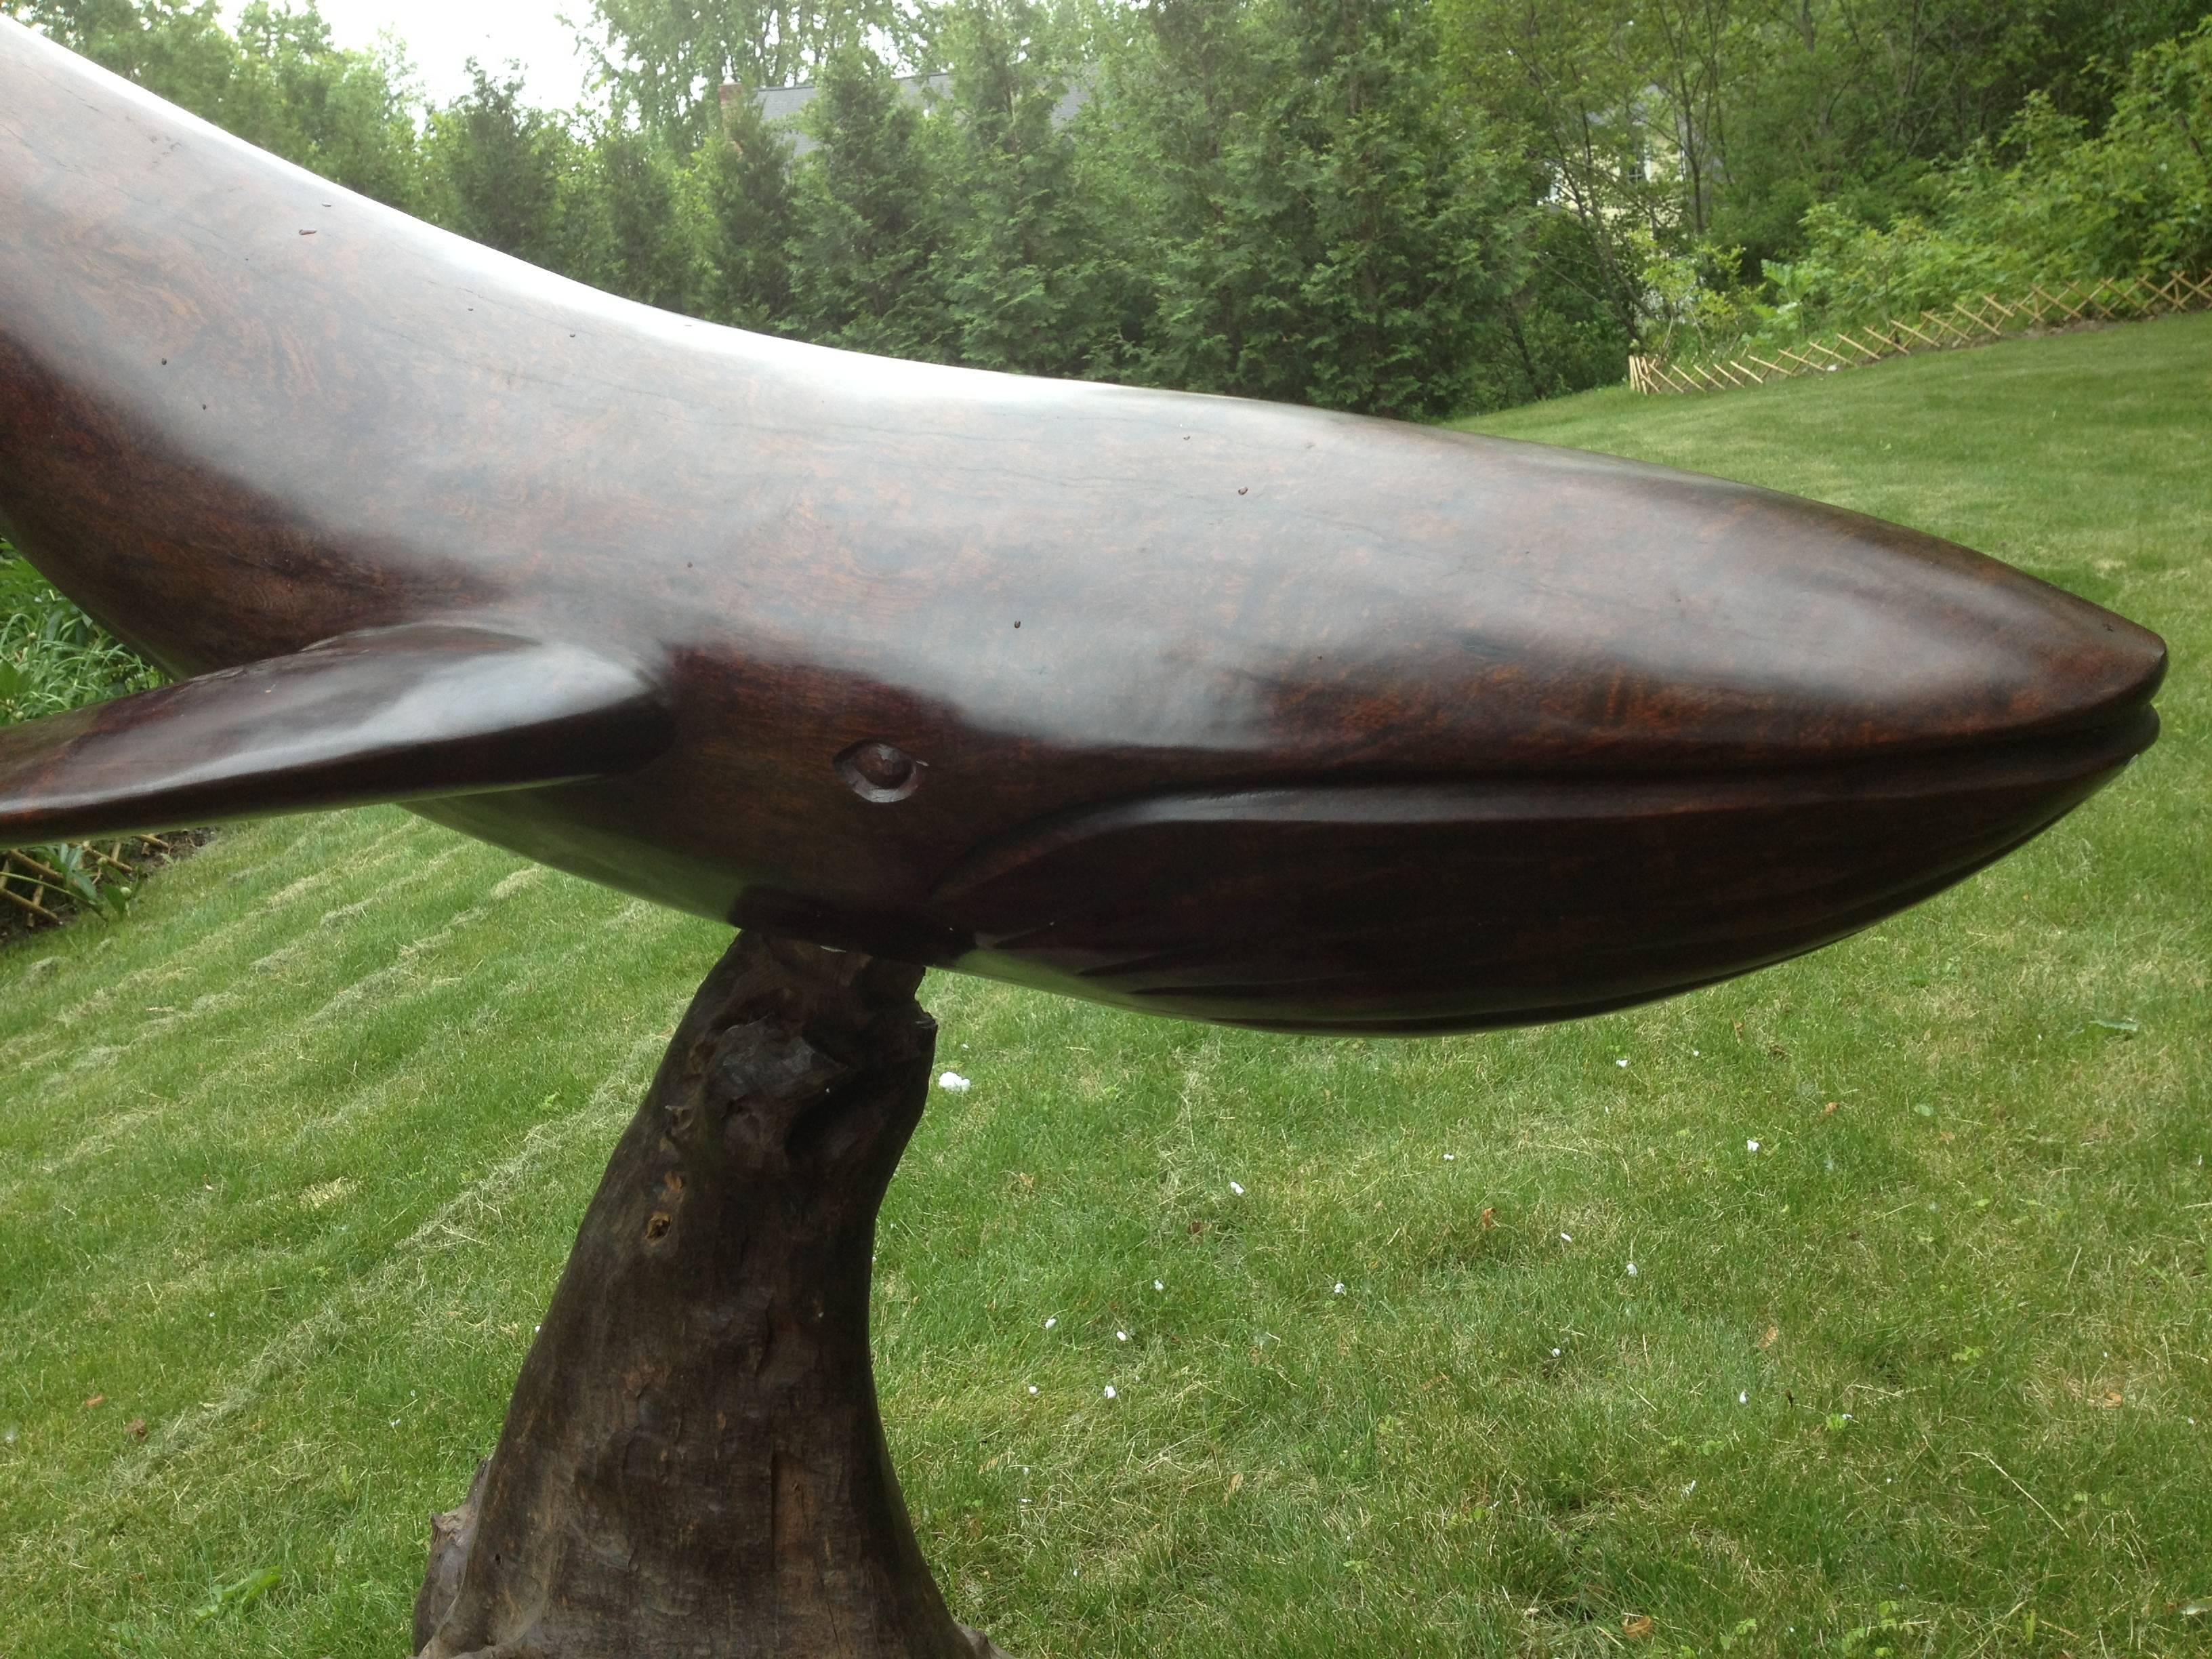 America’s, a monumental carved wooden whale, early to mid-20th century.
The large simply carved mammal fashioned from a heavy, dense ironwood and sitting atop a separate natural organic root wood base, both with patina from appropriate